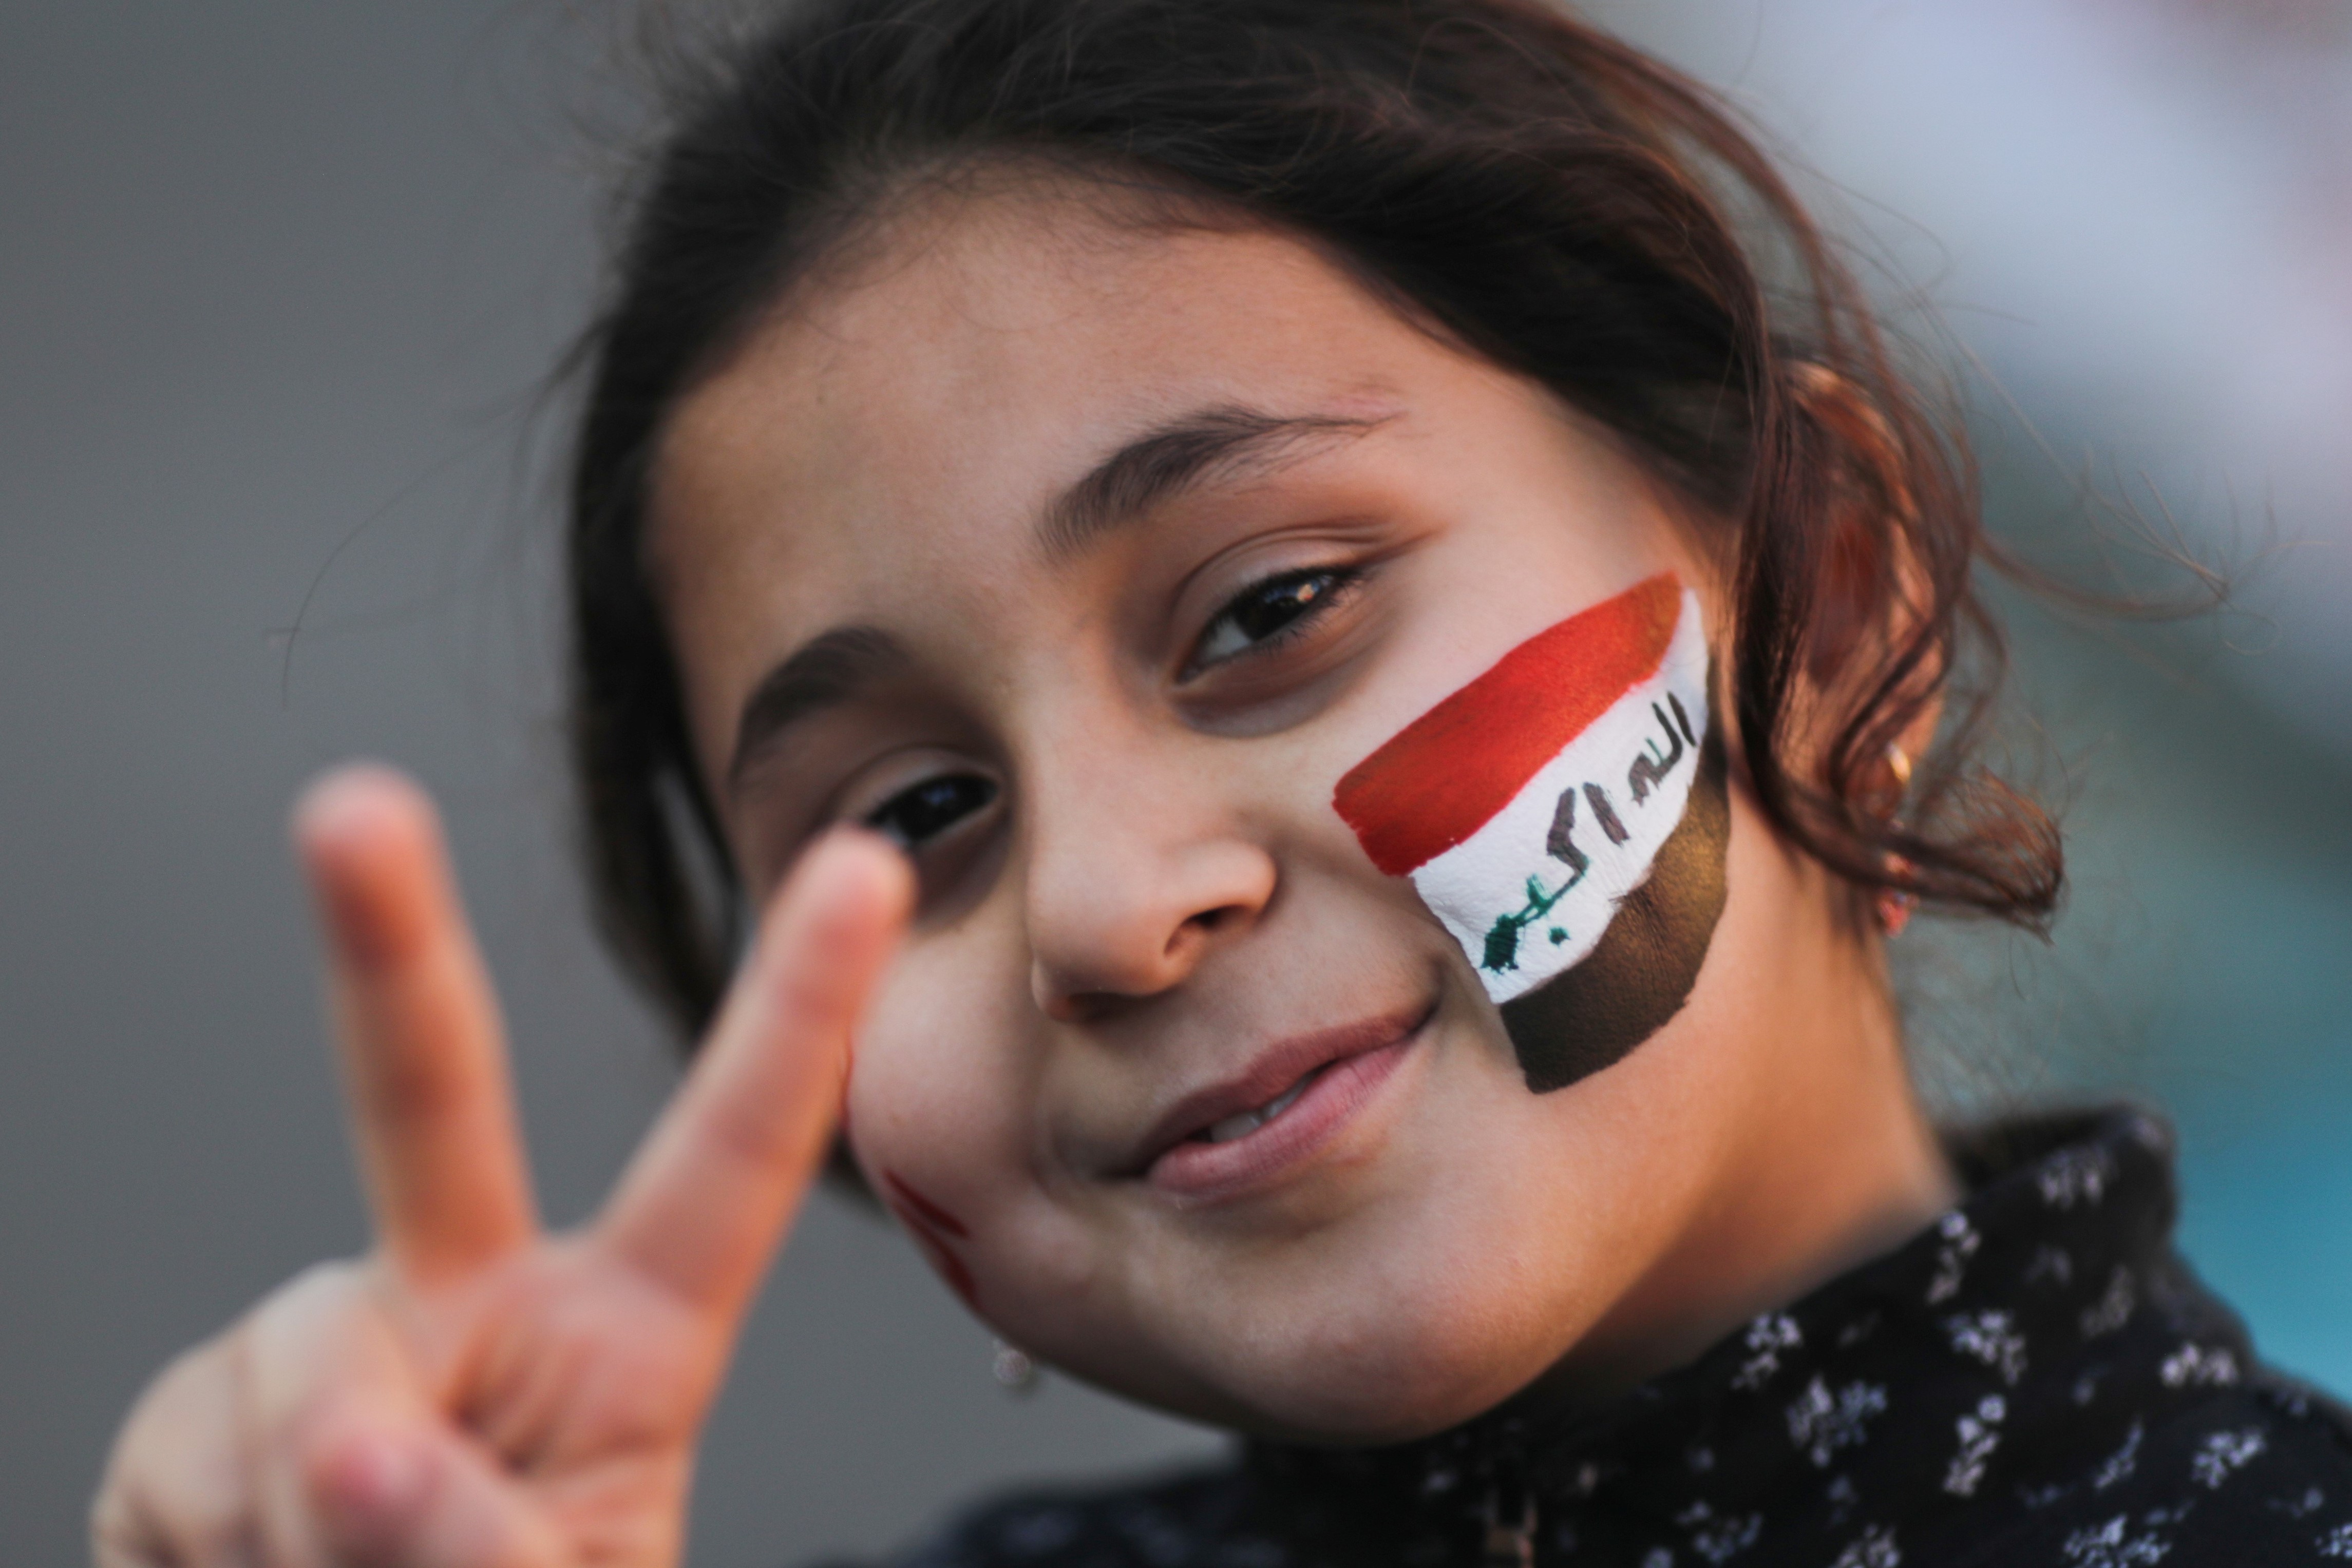 An Iraqi girl gestures during ongoing anti-government protests in Baghdad, Iraq December 20, 2019. REUTERS